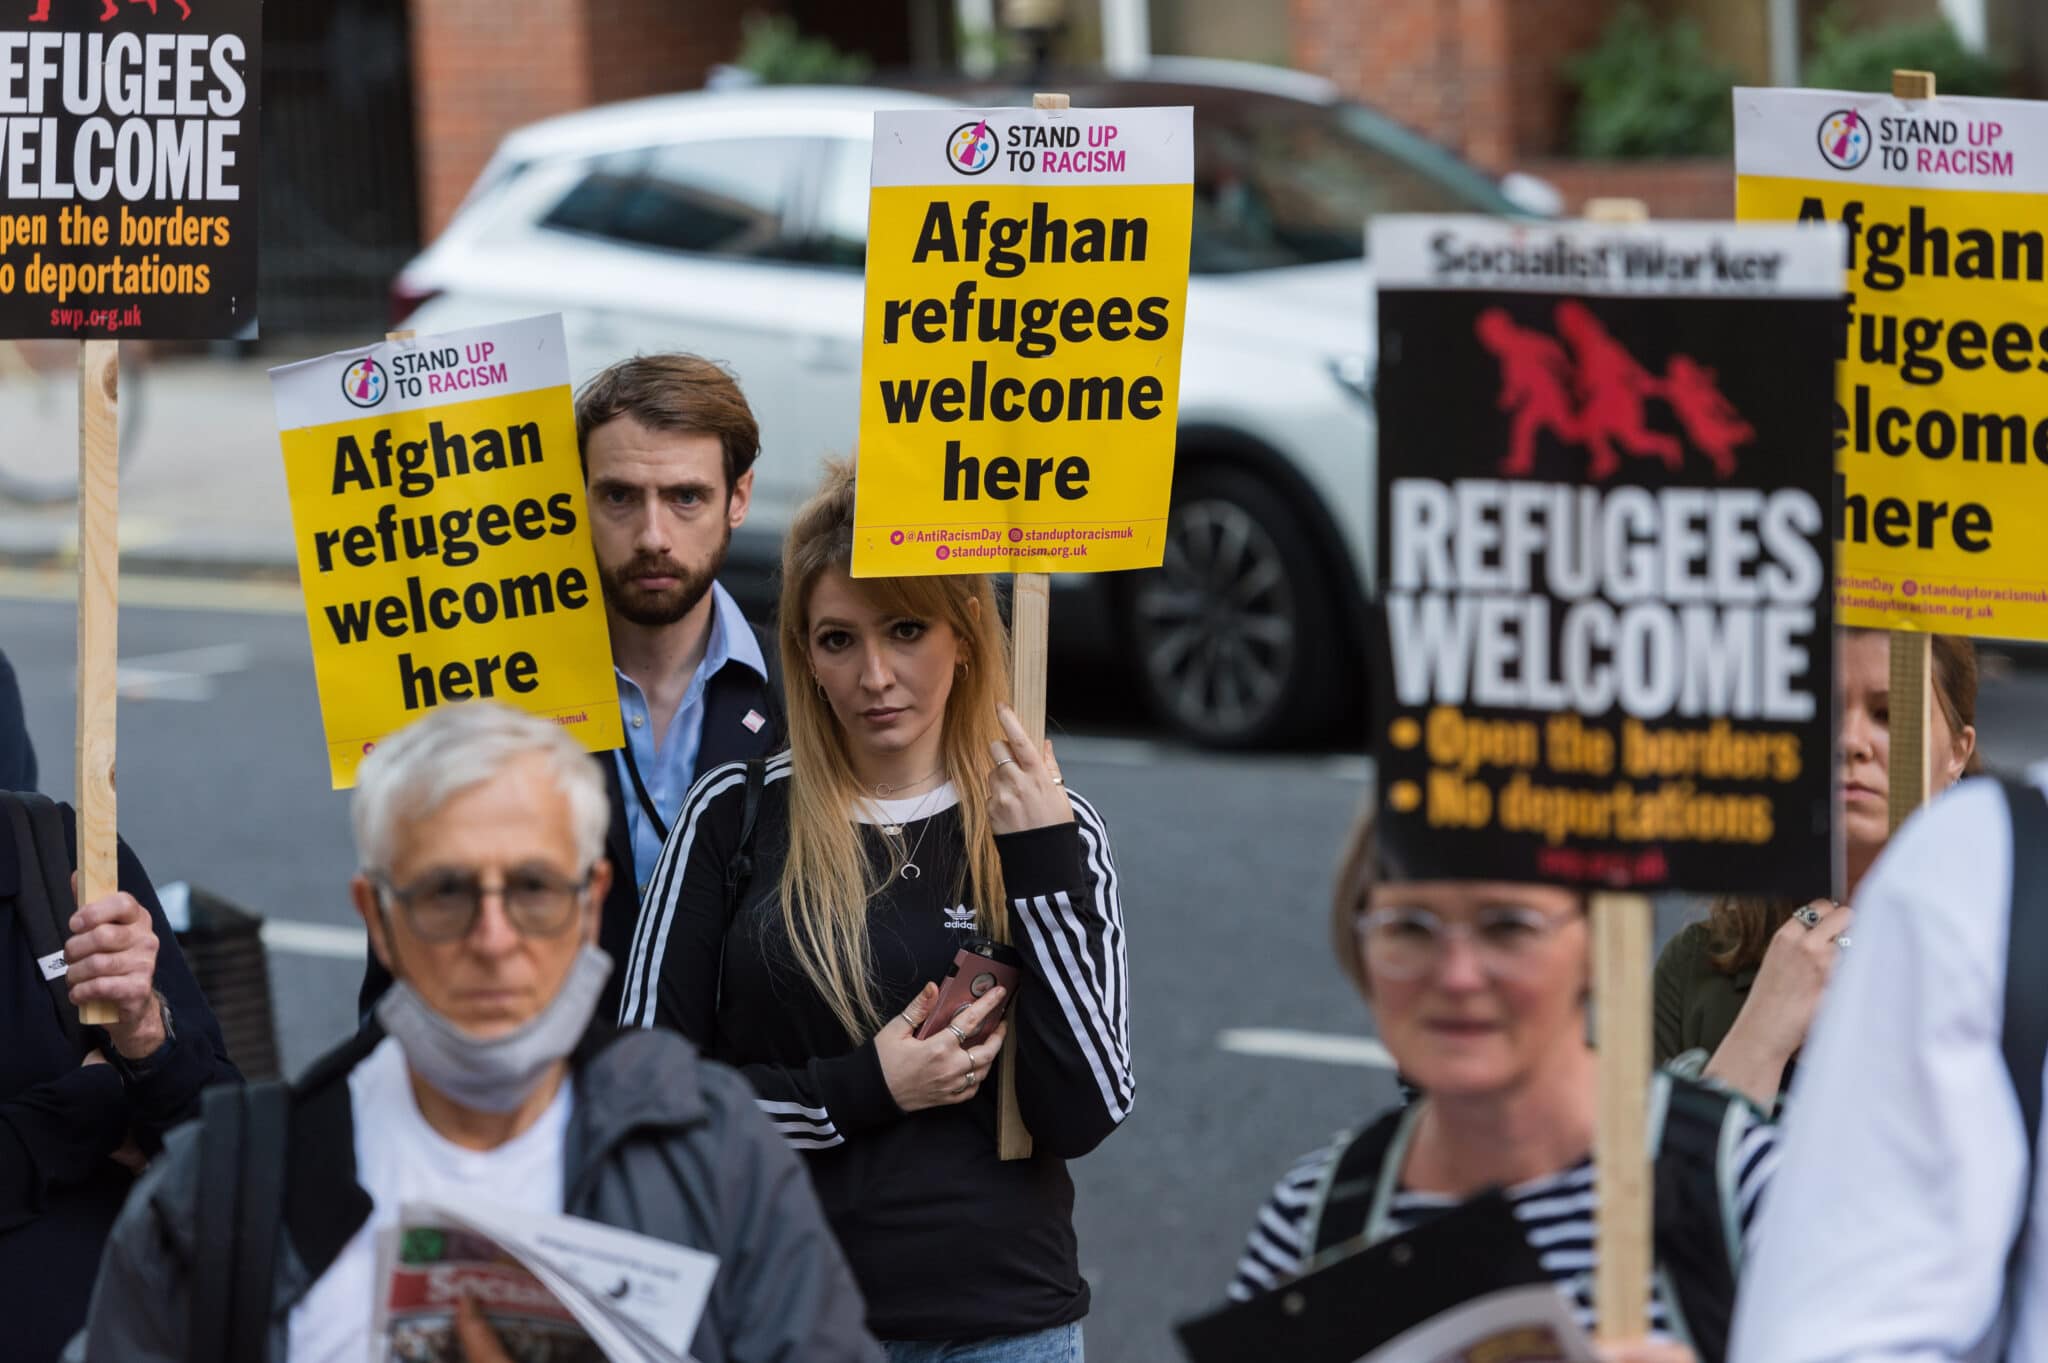 Demonstrators in London protest outside the Home Office demanding a safe passage to the UK for refugees fleeing Afghanistan